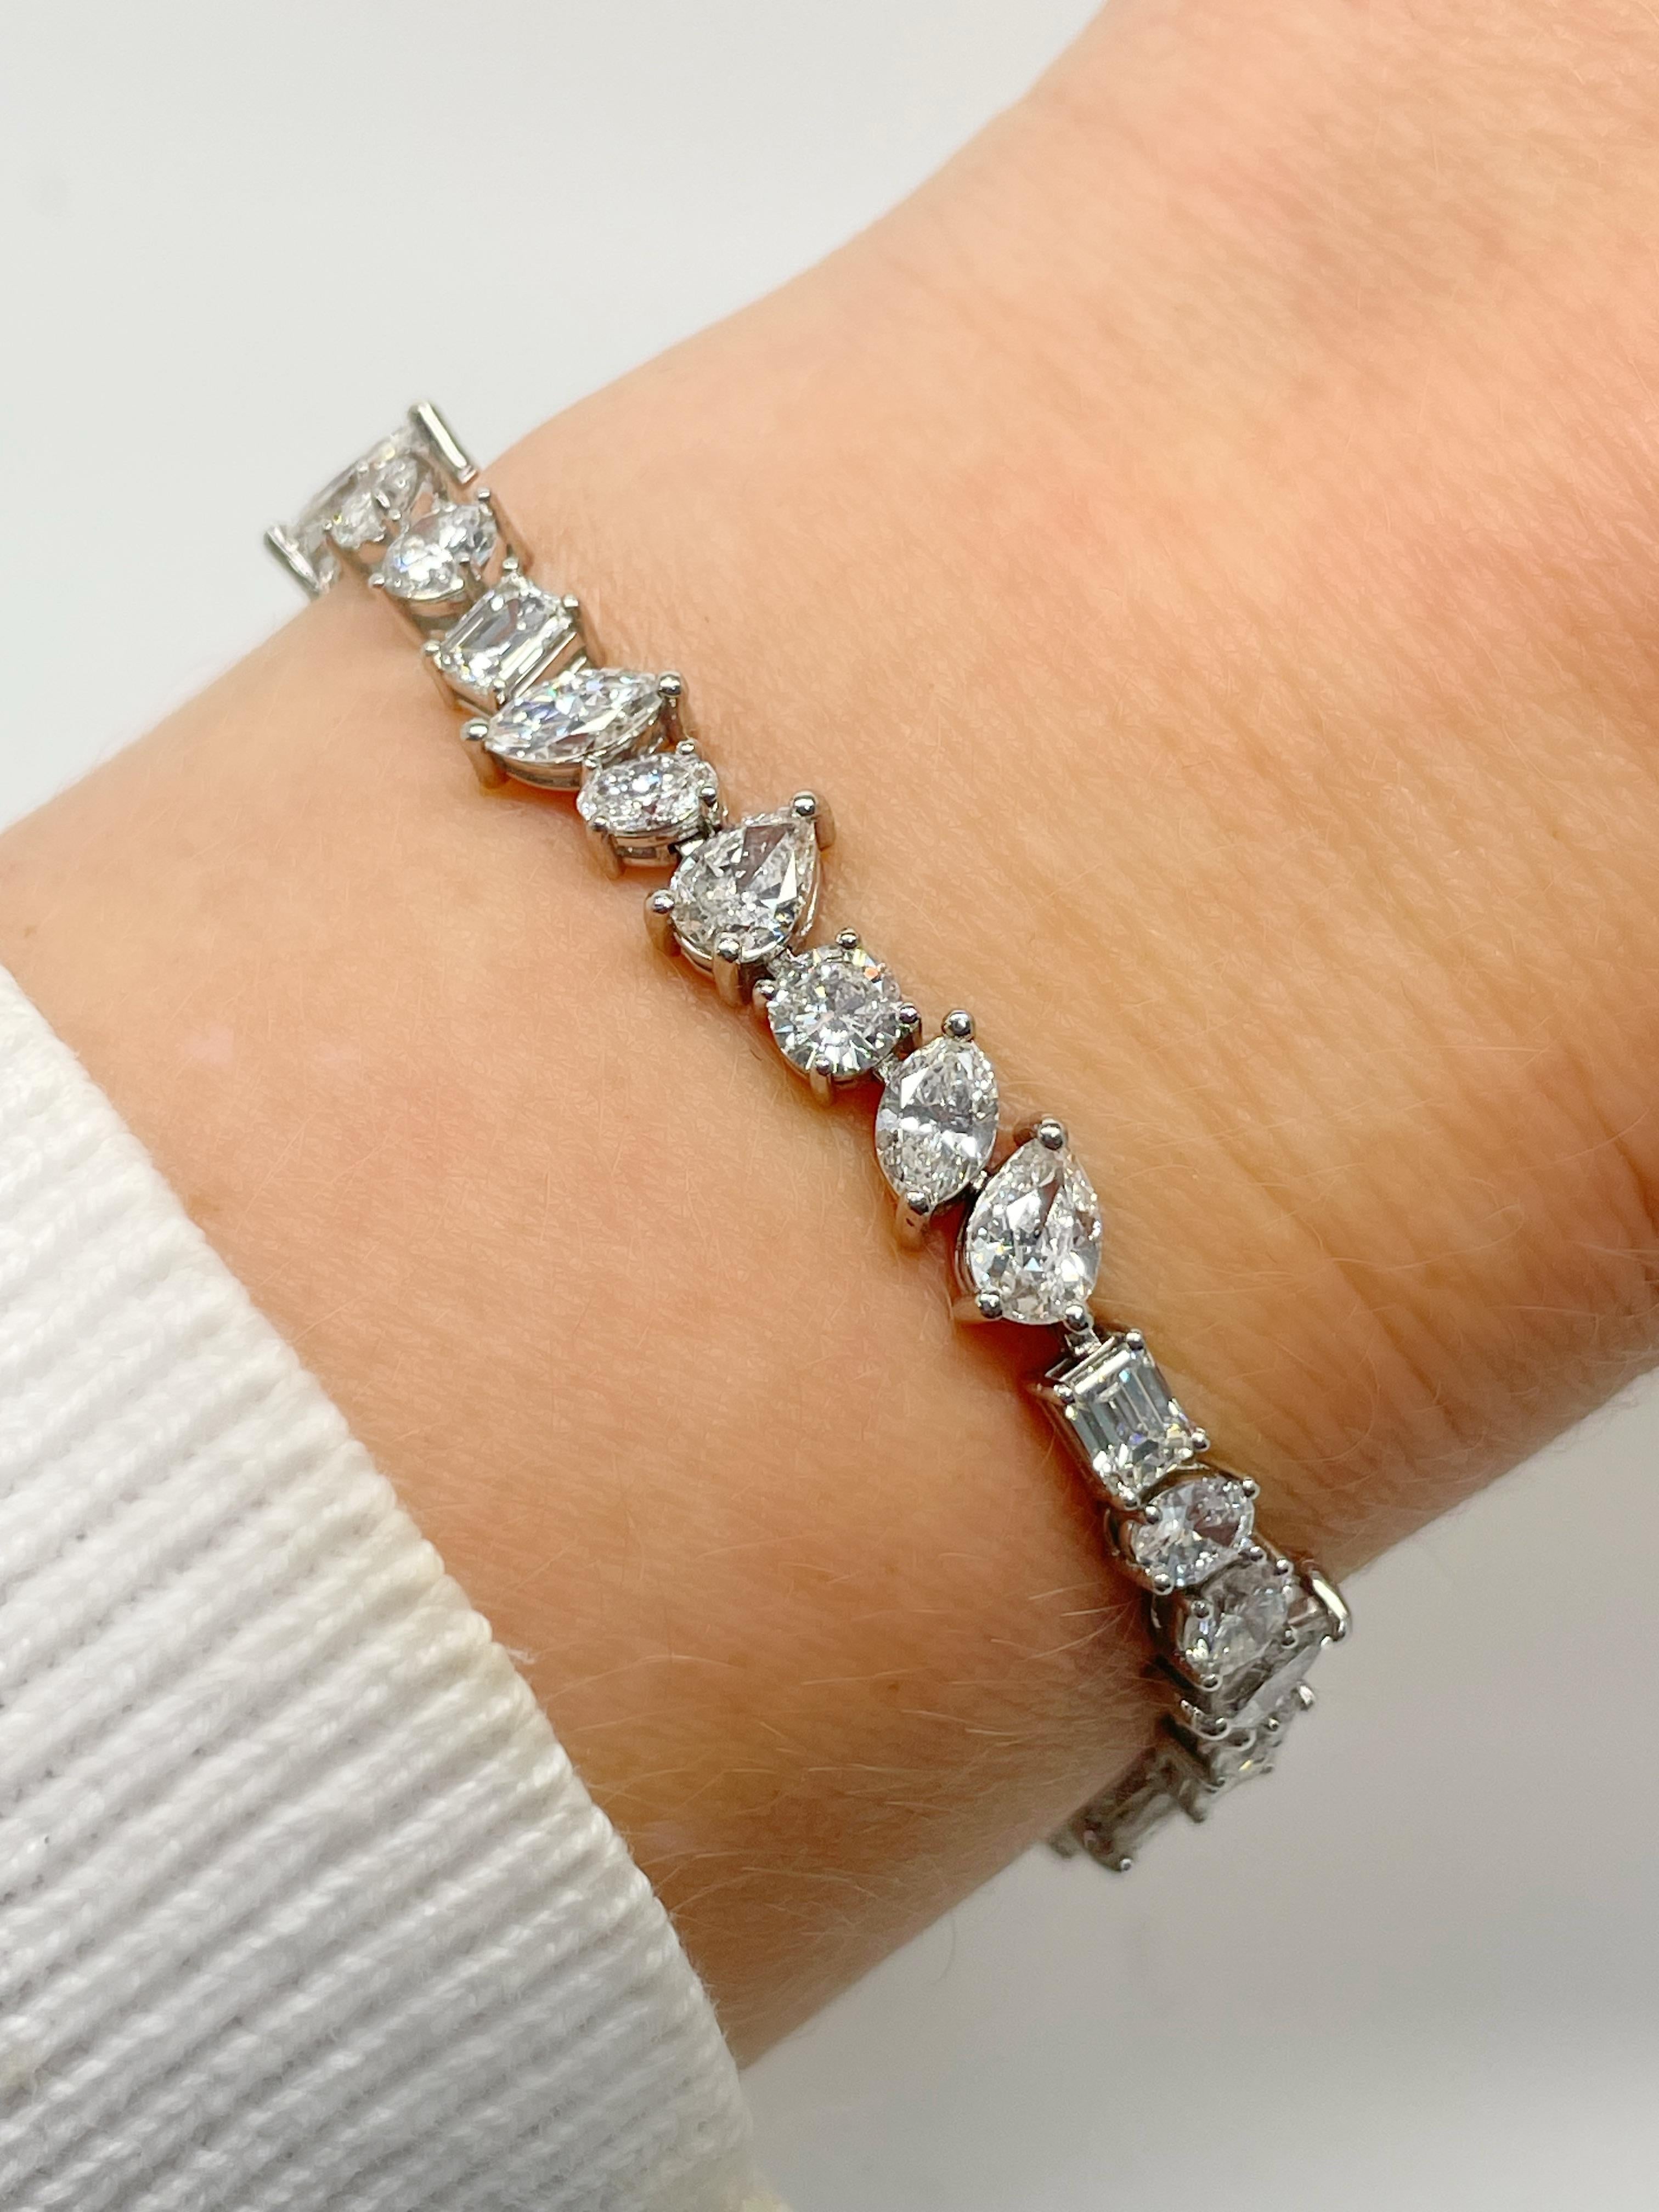 This super classic bracelet contains 39 pear, emerald, marquise, oval and round brilliant cut diamonds weighing approximately 13.00 carats total. Crafted in platinum, this bracelet is extremely well made and a perfect addition to your